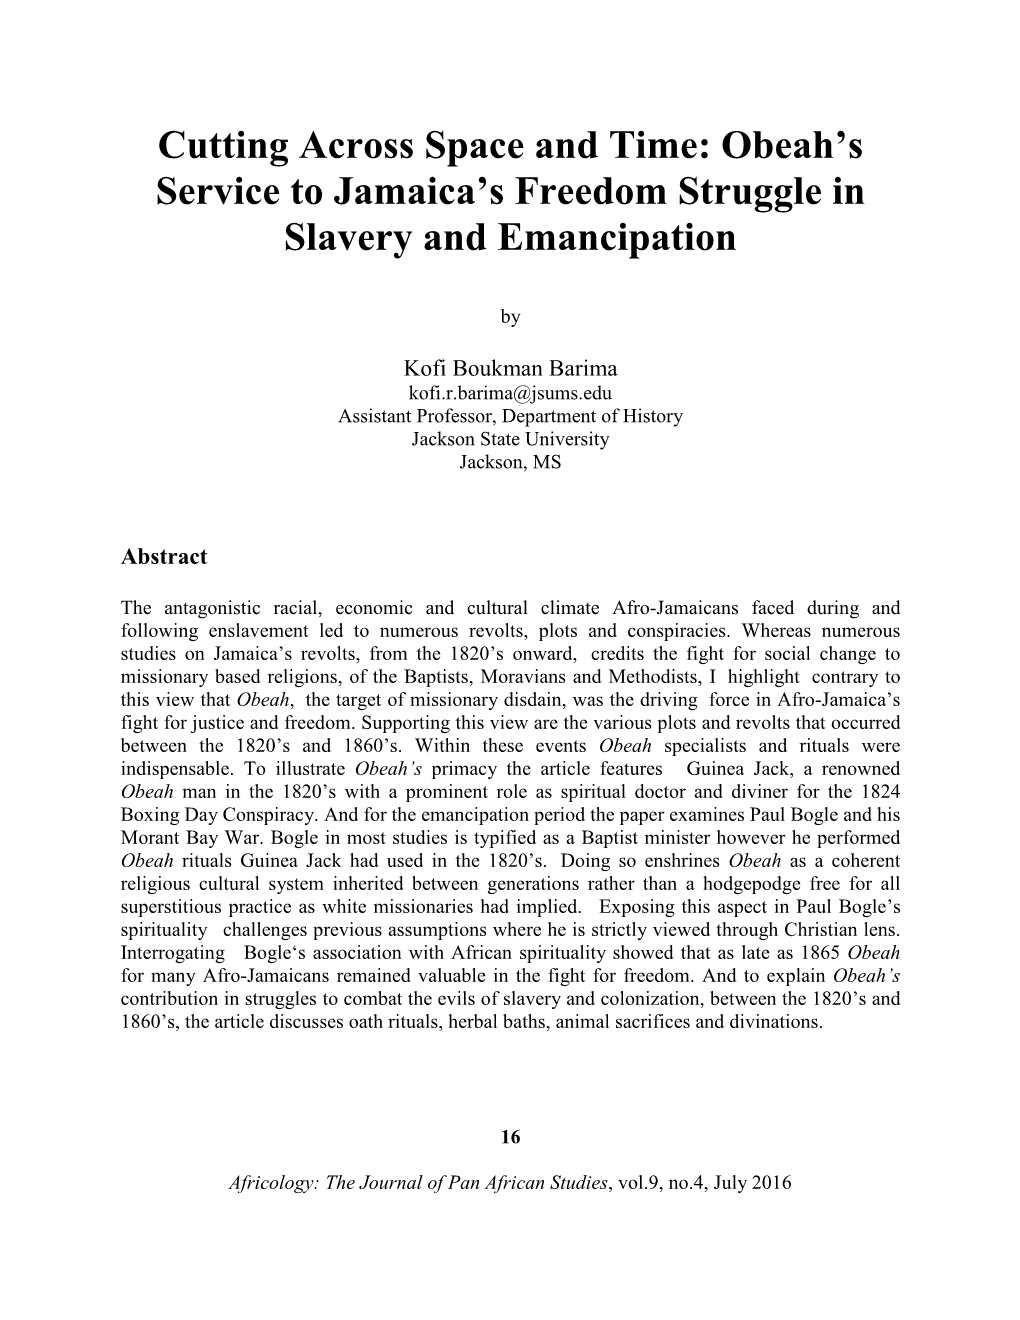 Obeah's Service to Jamaica's Freedom Struggle in Slavery And